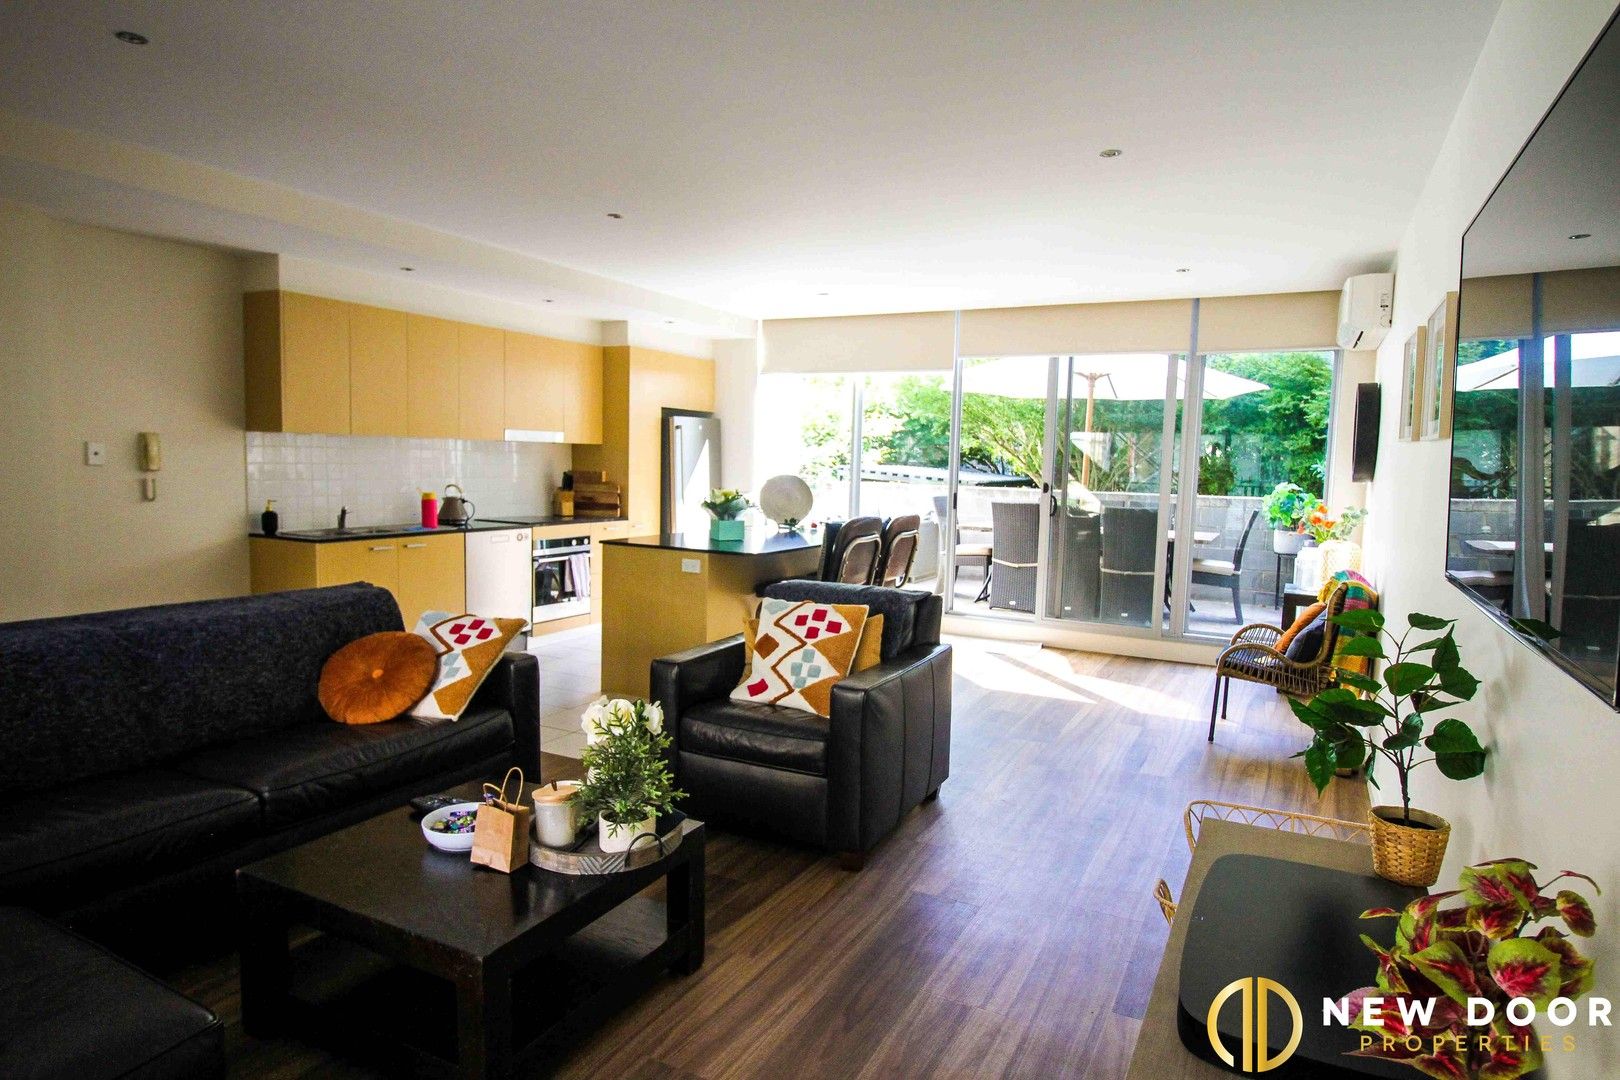 2 bedrooms Apartment / Unit / Flat in 7/2 The Mews CITY ACT, 2601